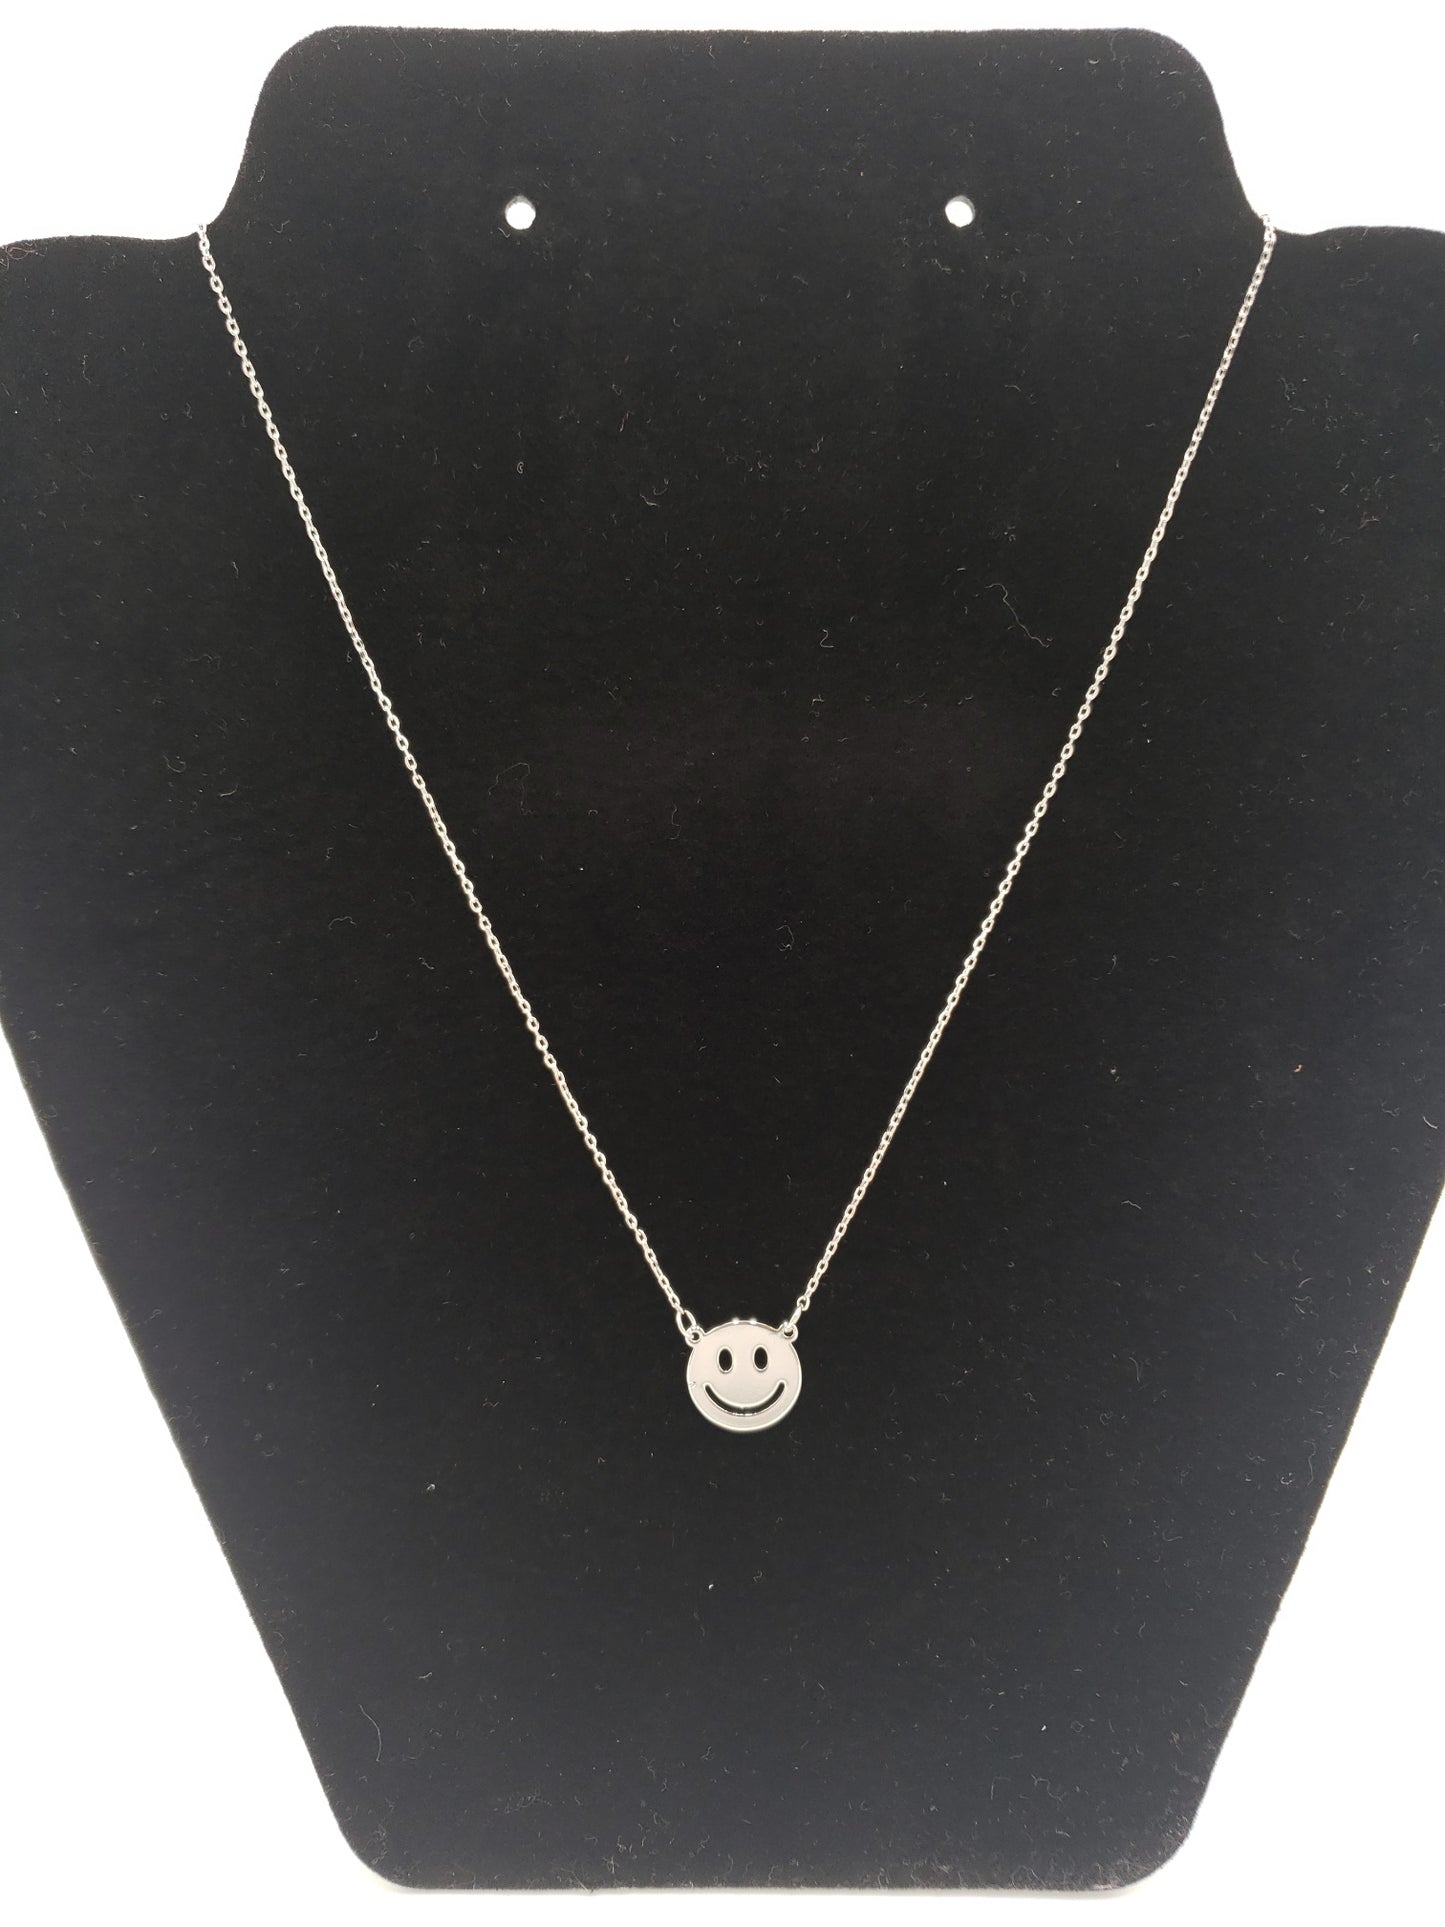 Load image into Gallery viewer, Happy Face Necklace
